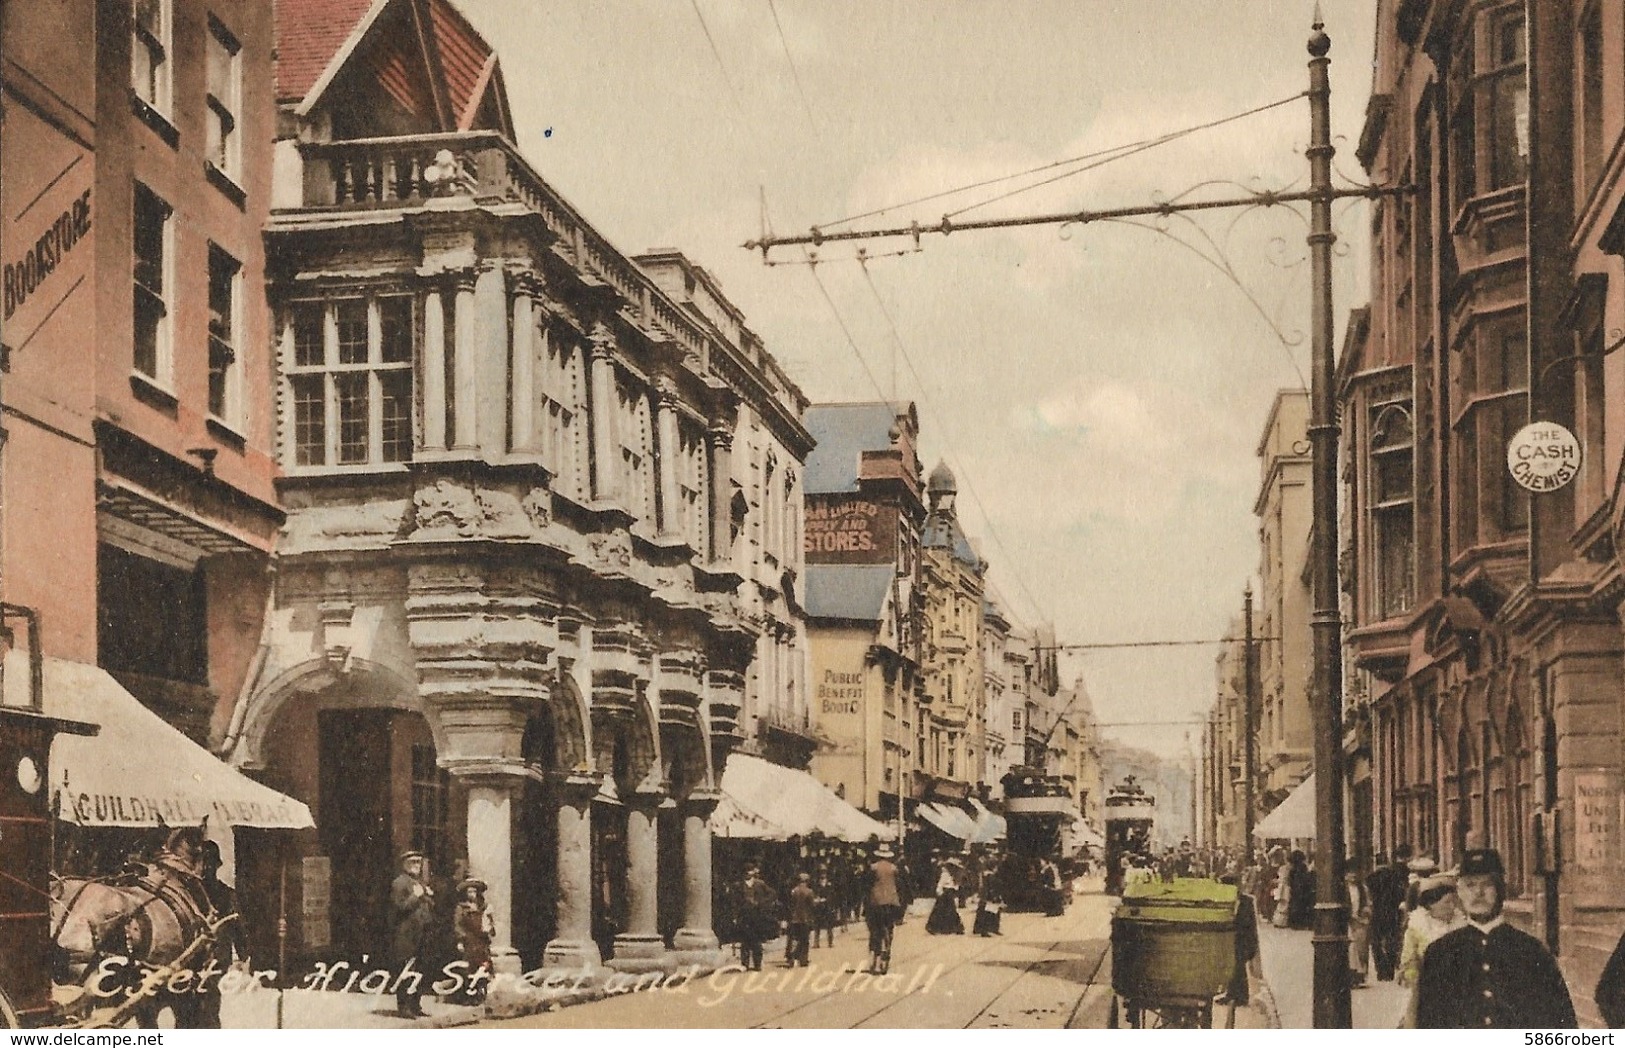 CARTE POSTALE ORIGINALE ANCIENNE COULEUR : EXETER HIGH STREET AND GUILDHALL DEVON  ANGLETERRE ANIMEE - Exeter